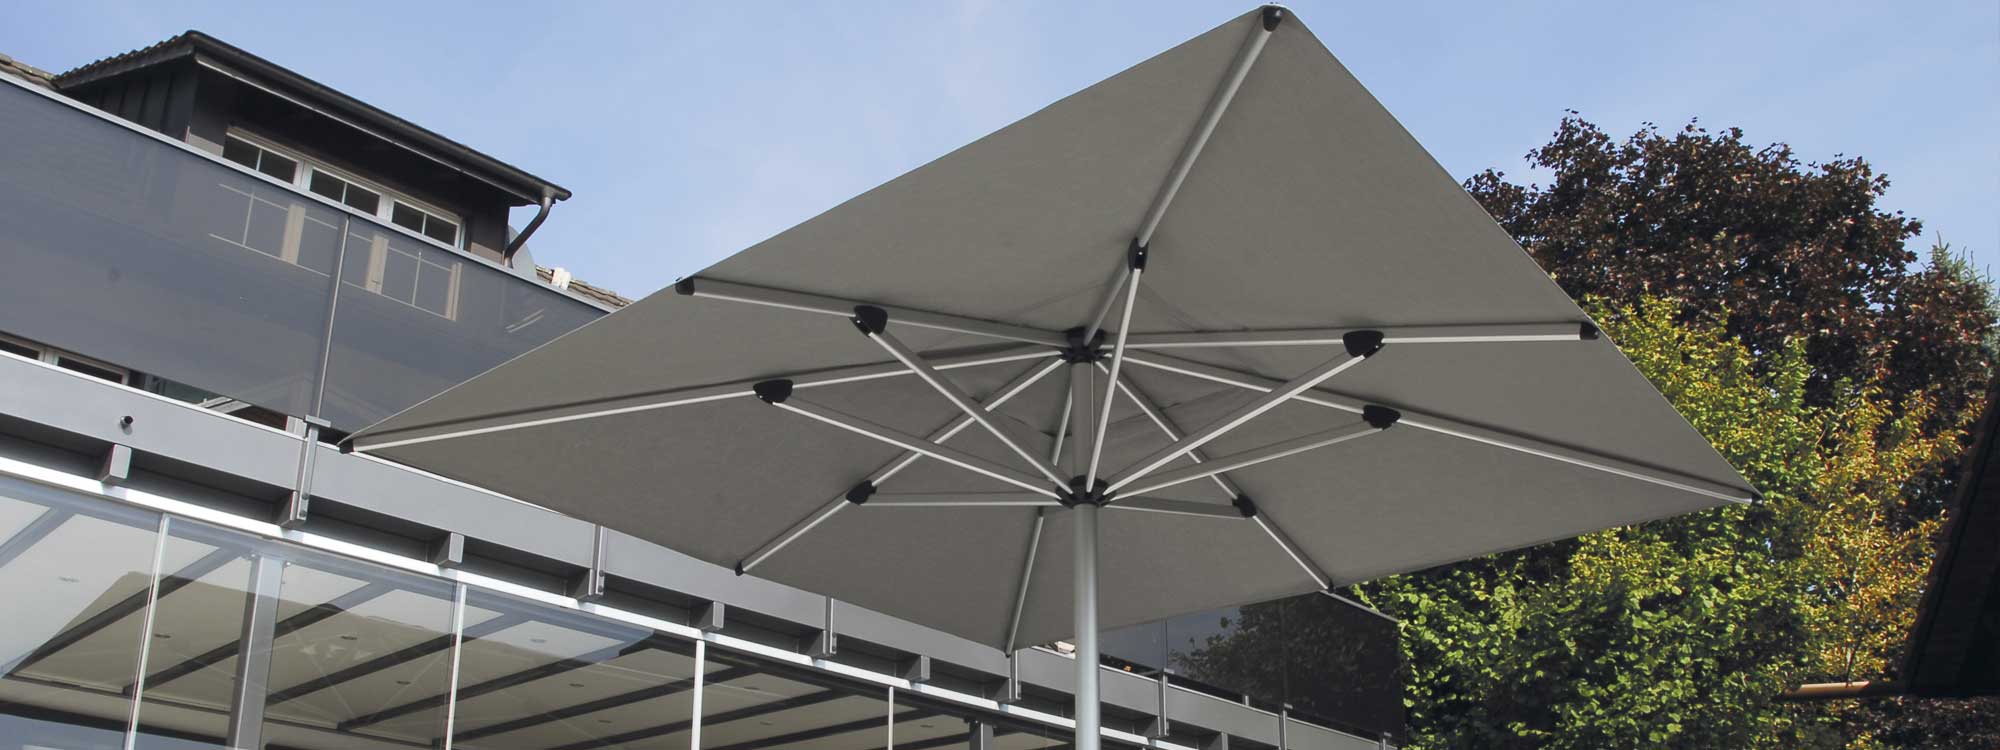 Image showing underside of Shademaker Astral large centre pole parasol's aluminium mast and ribs, and taupe acrylic fabric canopy